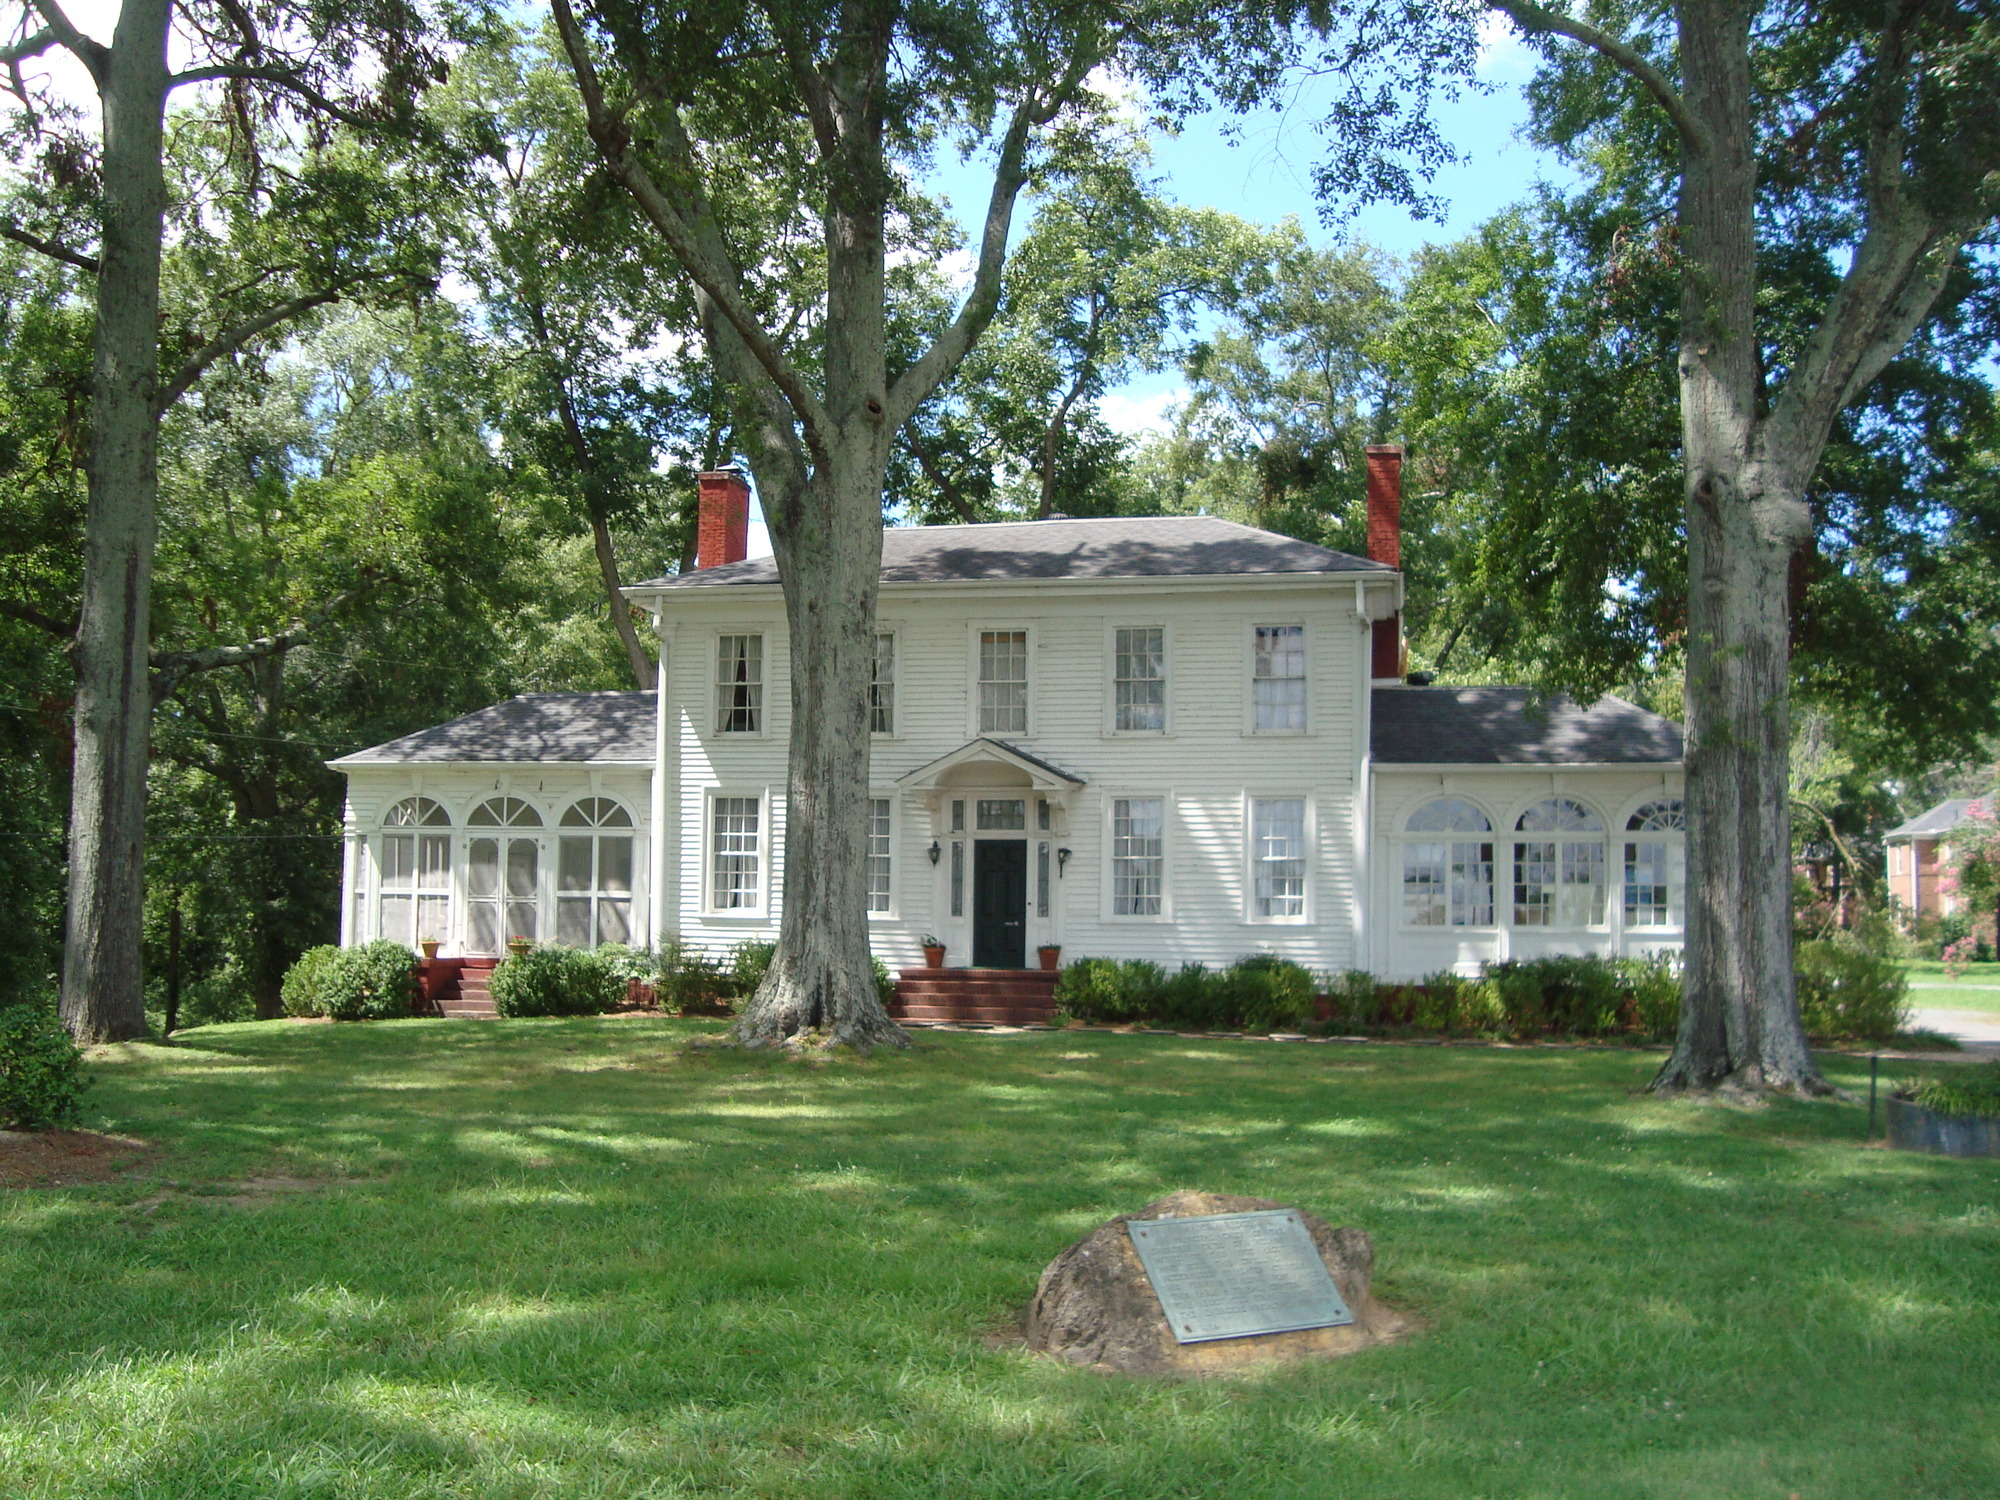 A historical marker in front of the Chieftains Museum, Major Ridge Home in Rome, Georgia